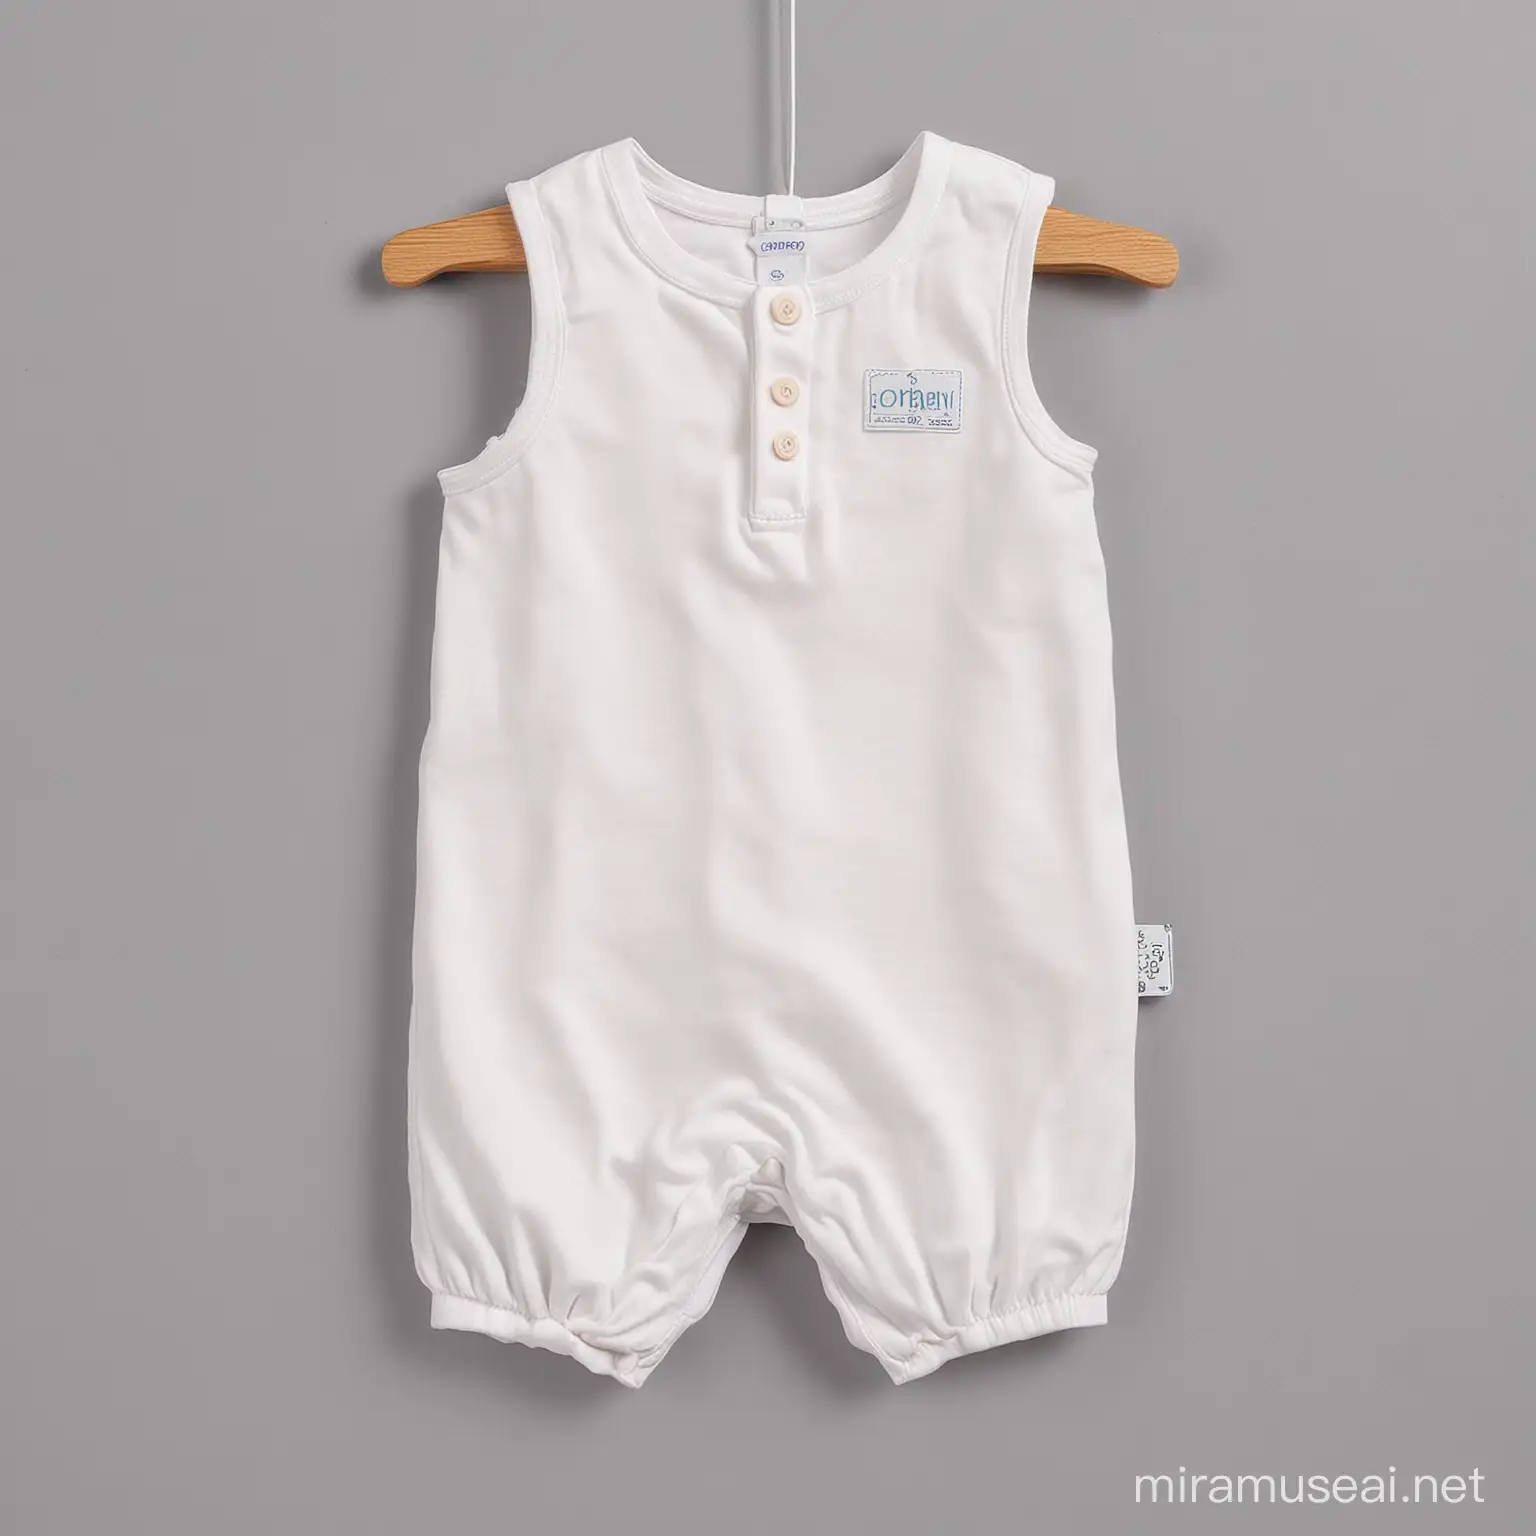 Baby Romper with Branded Tag Adorable Infant Clothing Detail